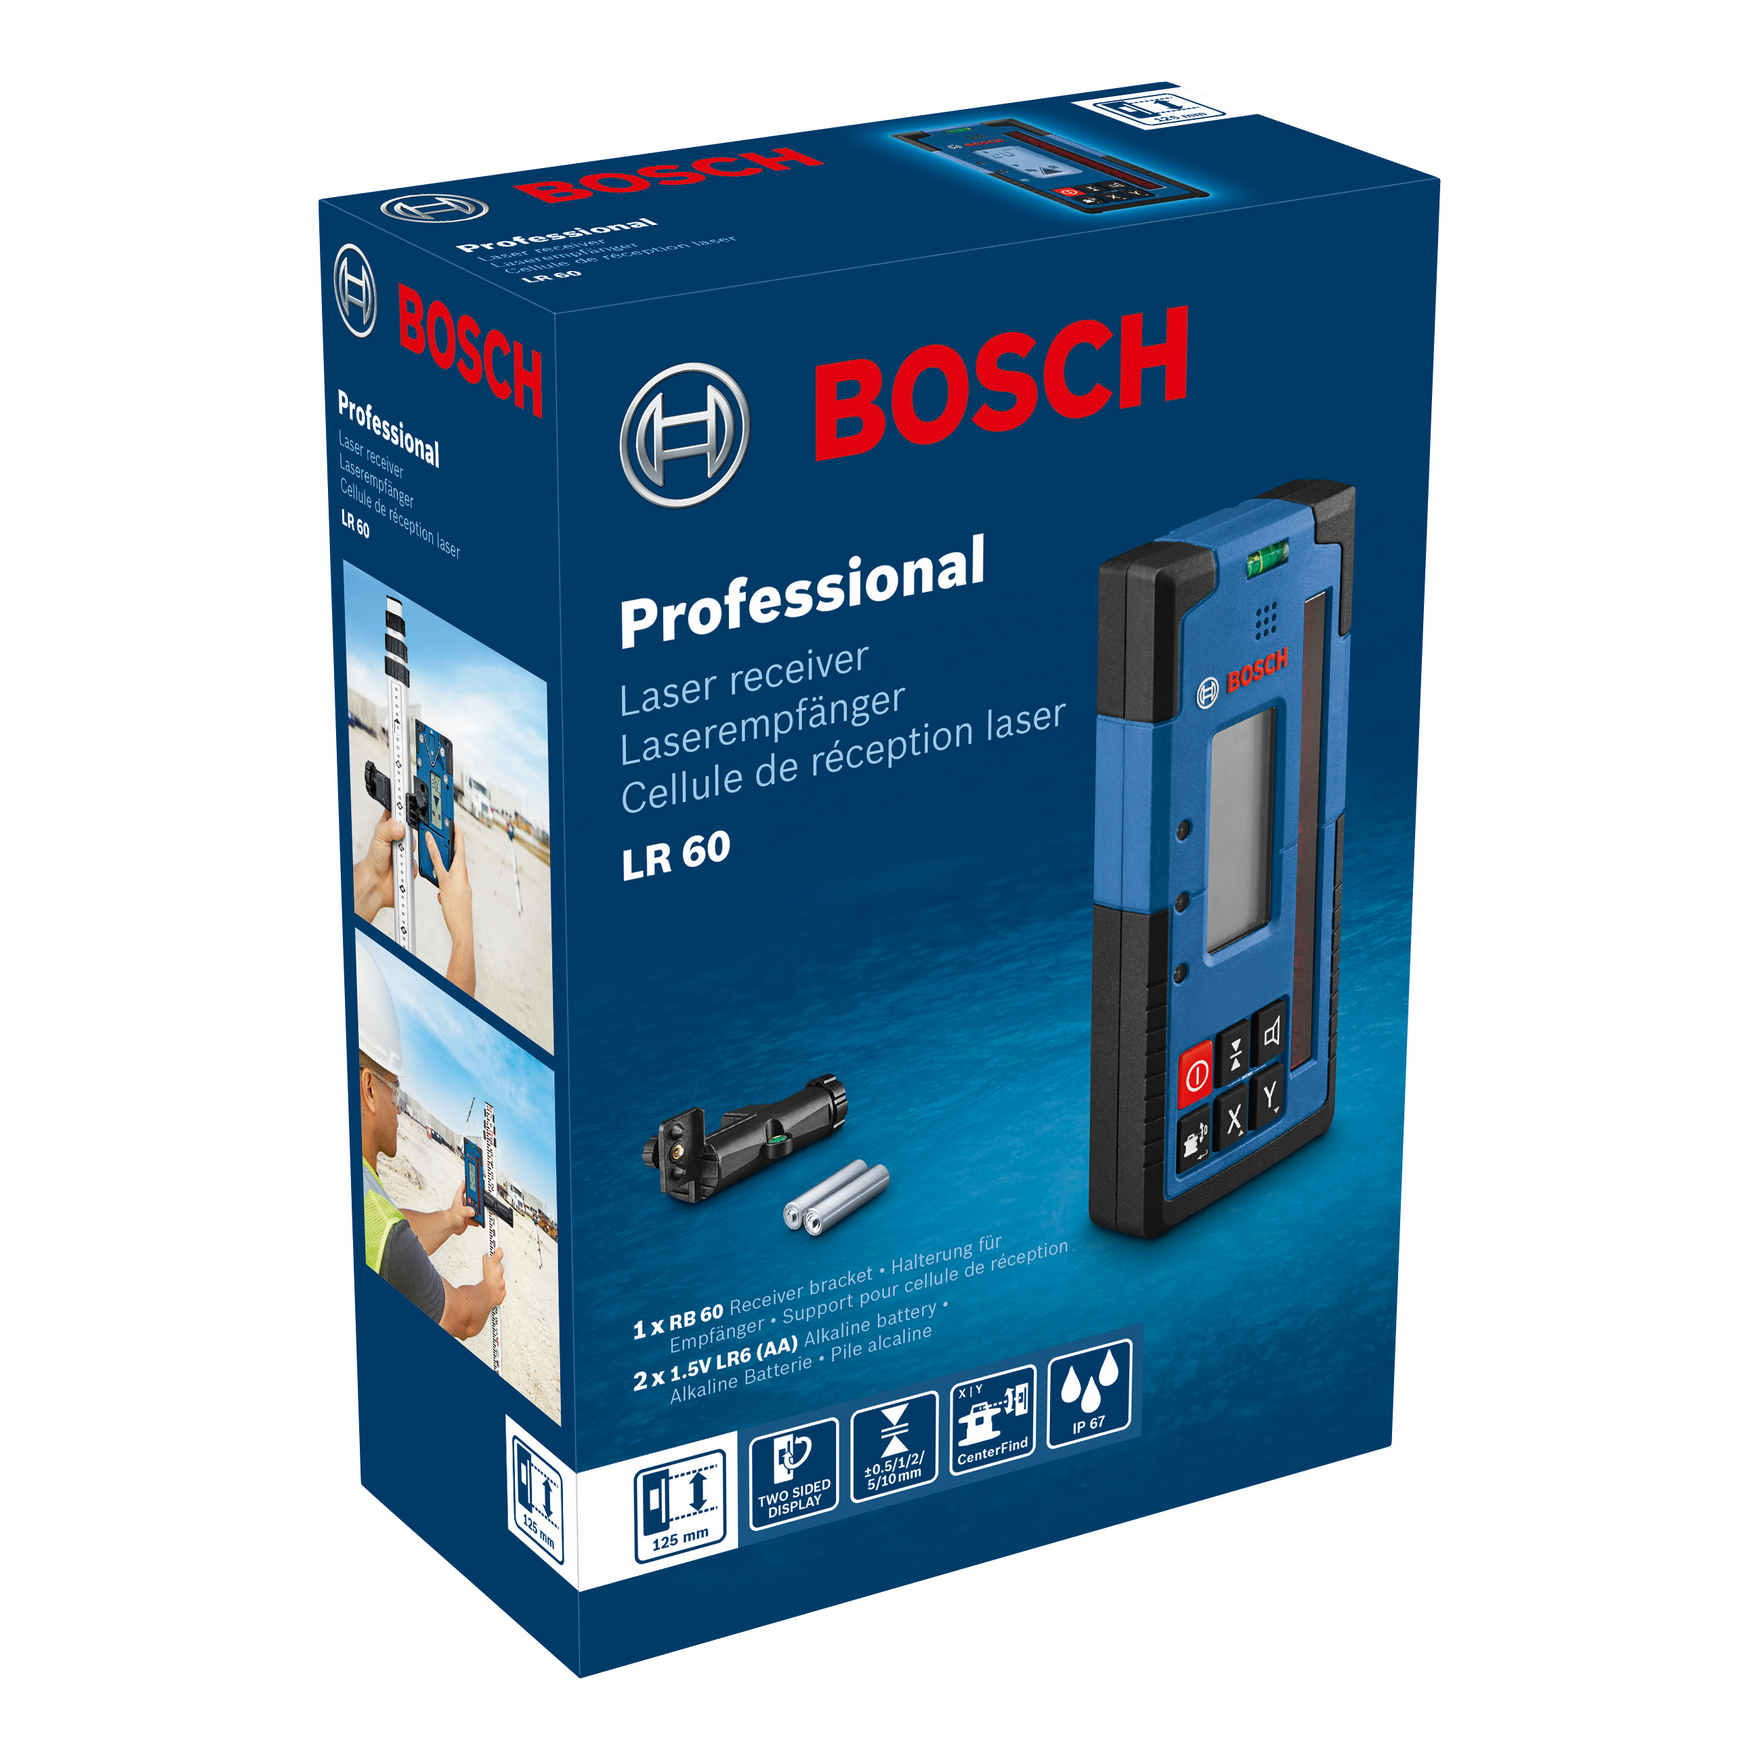 Bosch Professional Laser Receiver LR 60 0601069P00 Power Tool Services